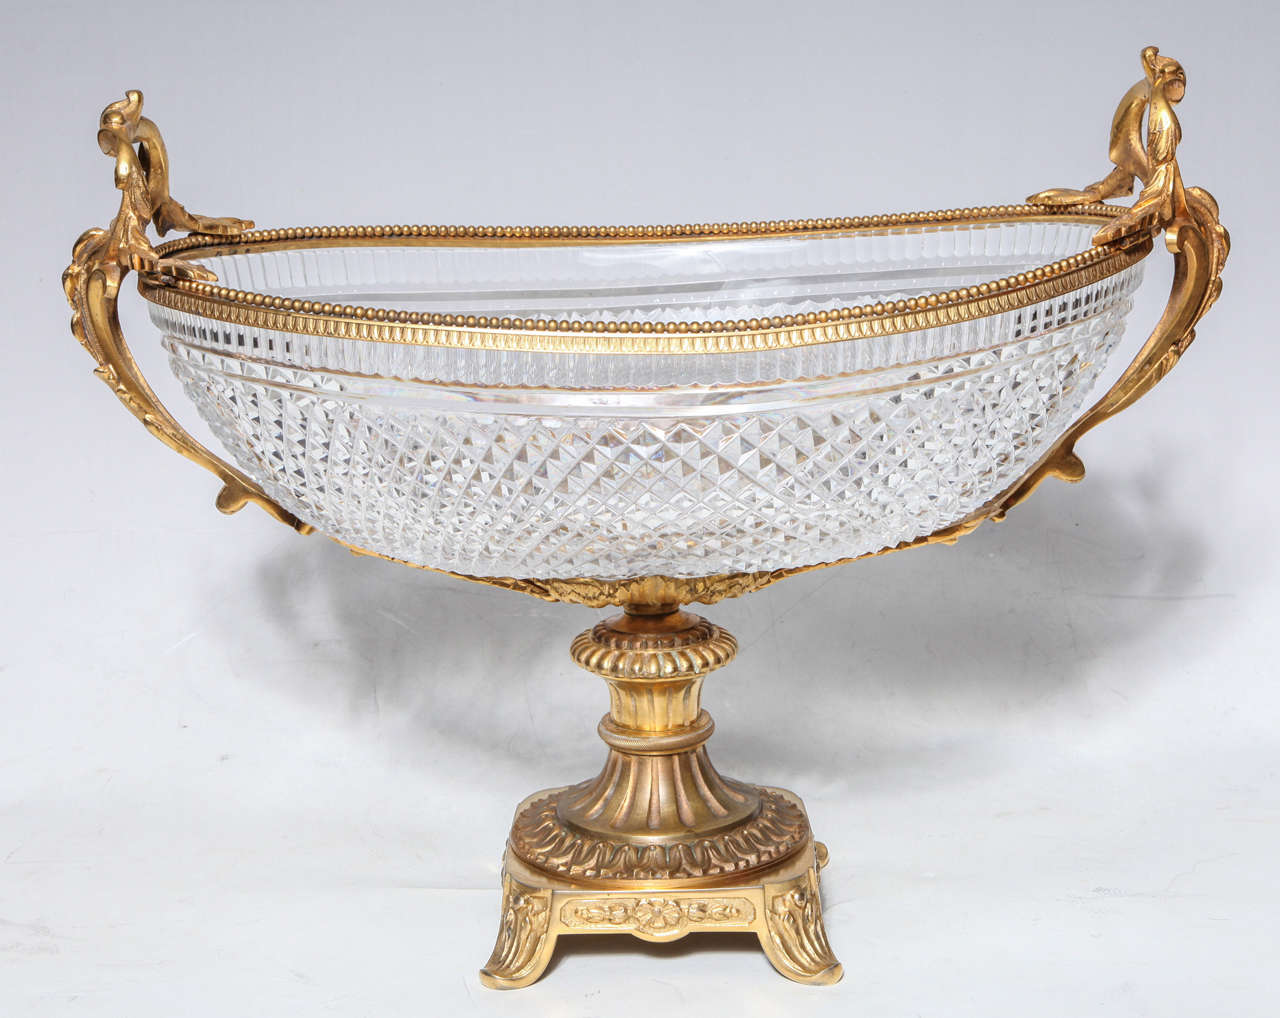 Antique hand diamond cut crystal and gilt bronze mounted centerpiece, attributed to Baccarat. The finely cast and hand chased gilt bronze is modeled into curving floral leaves.